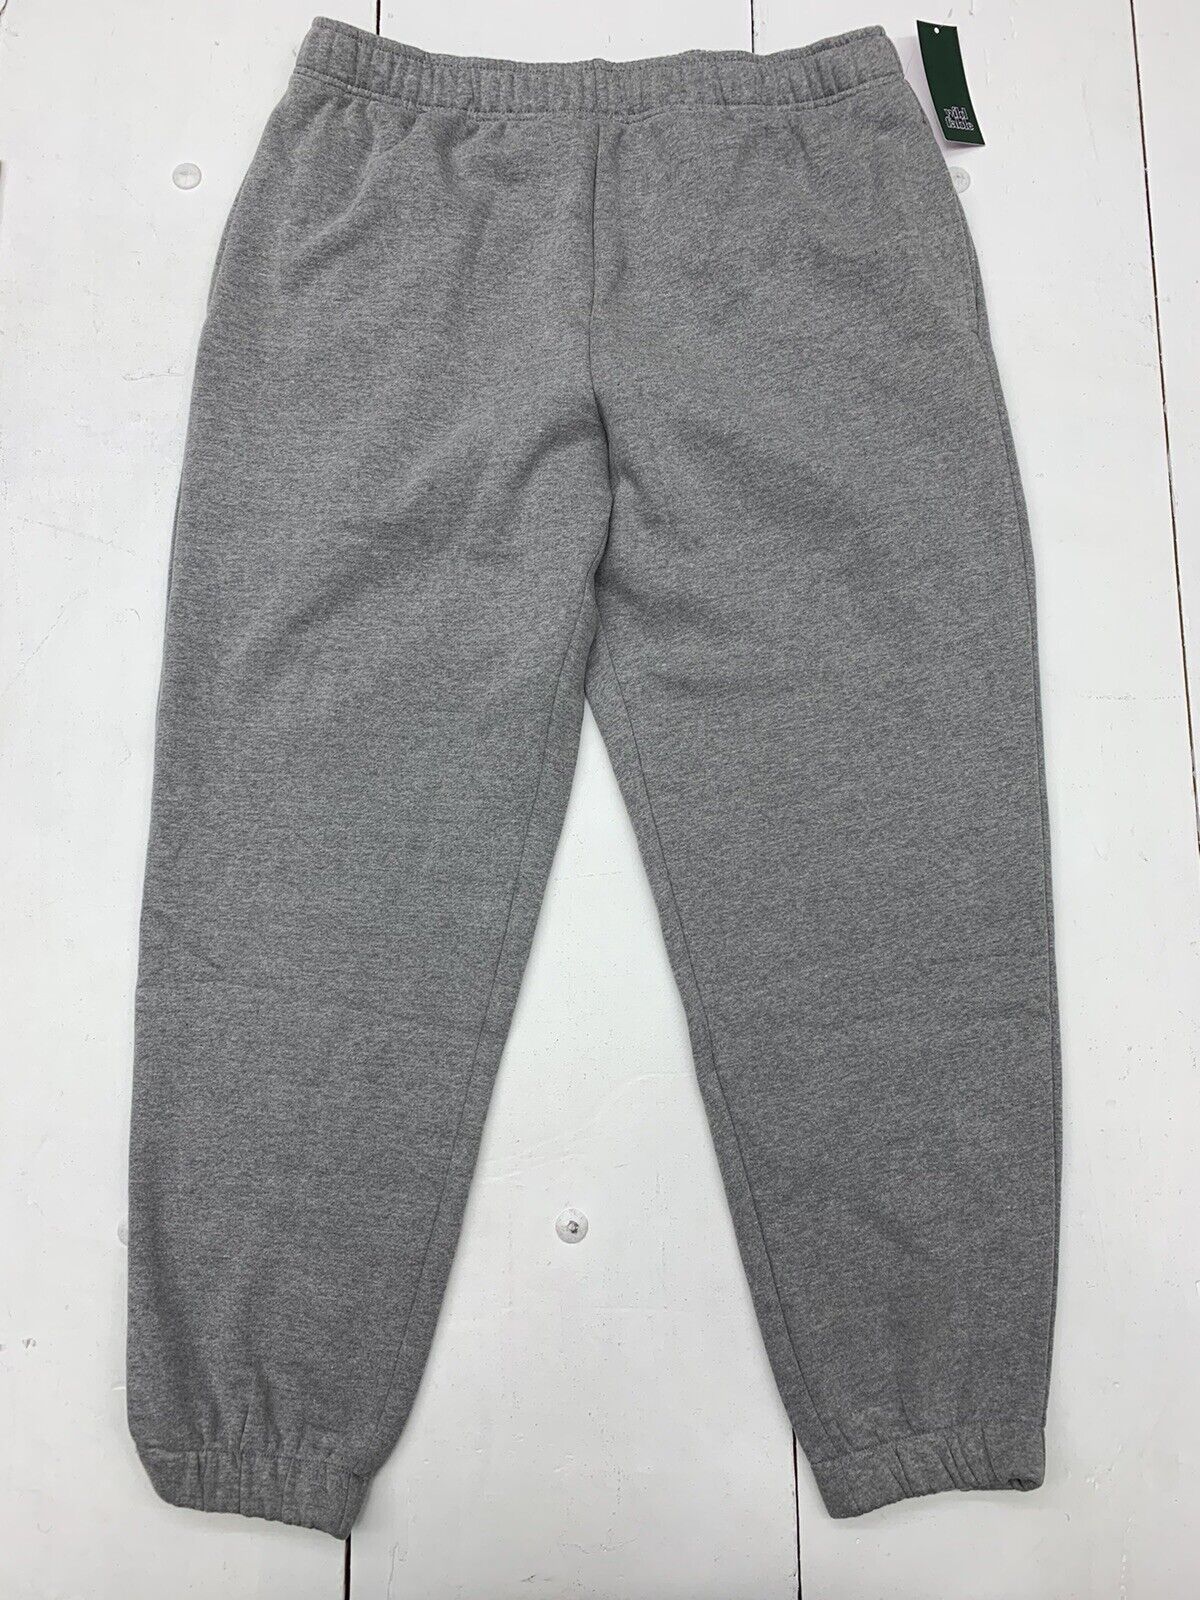 Wild Fable Womens gray Sweatpants Size Large